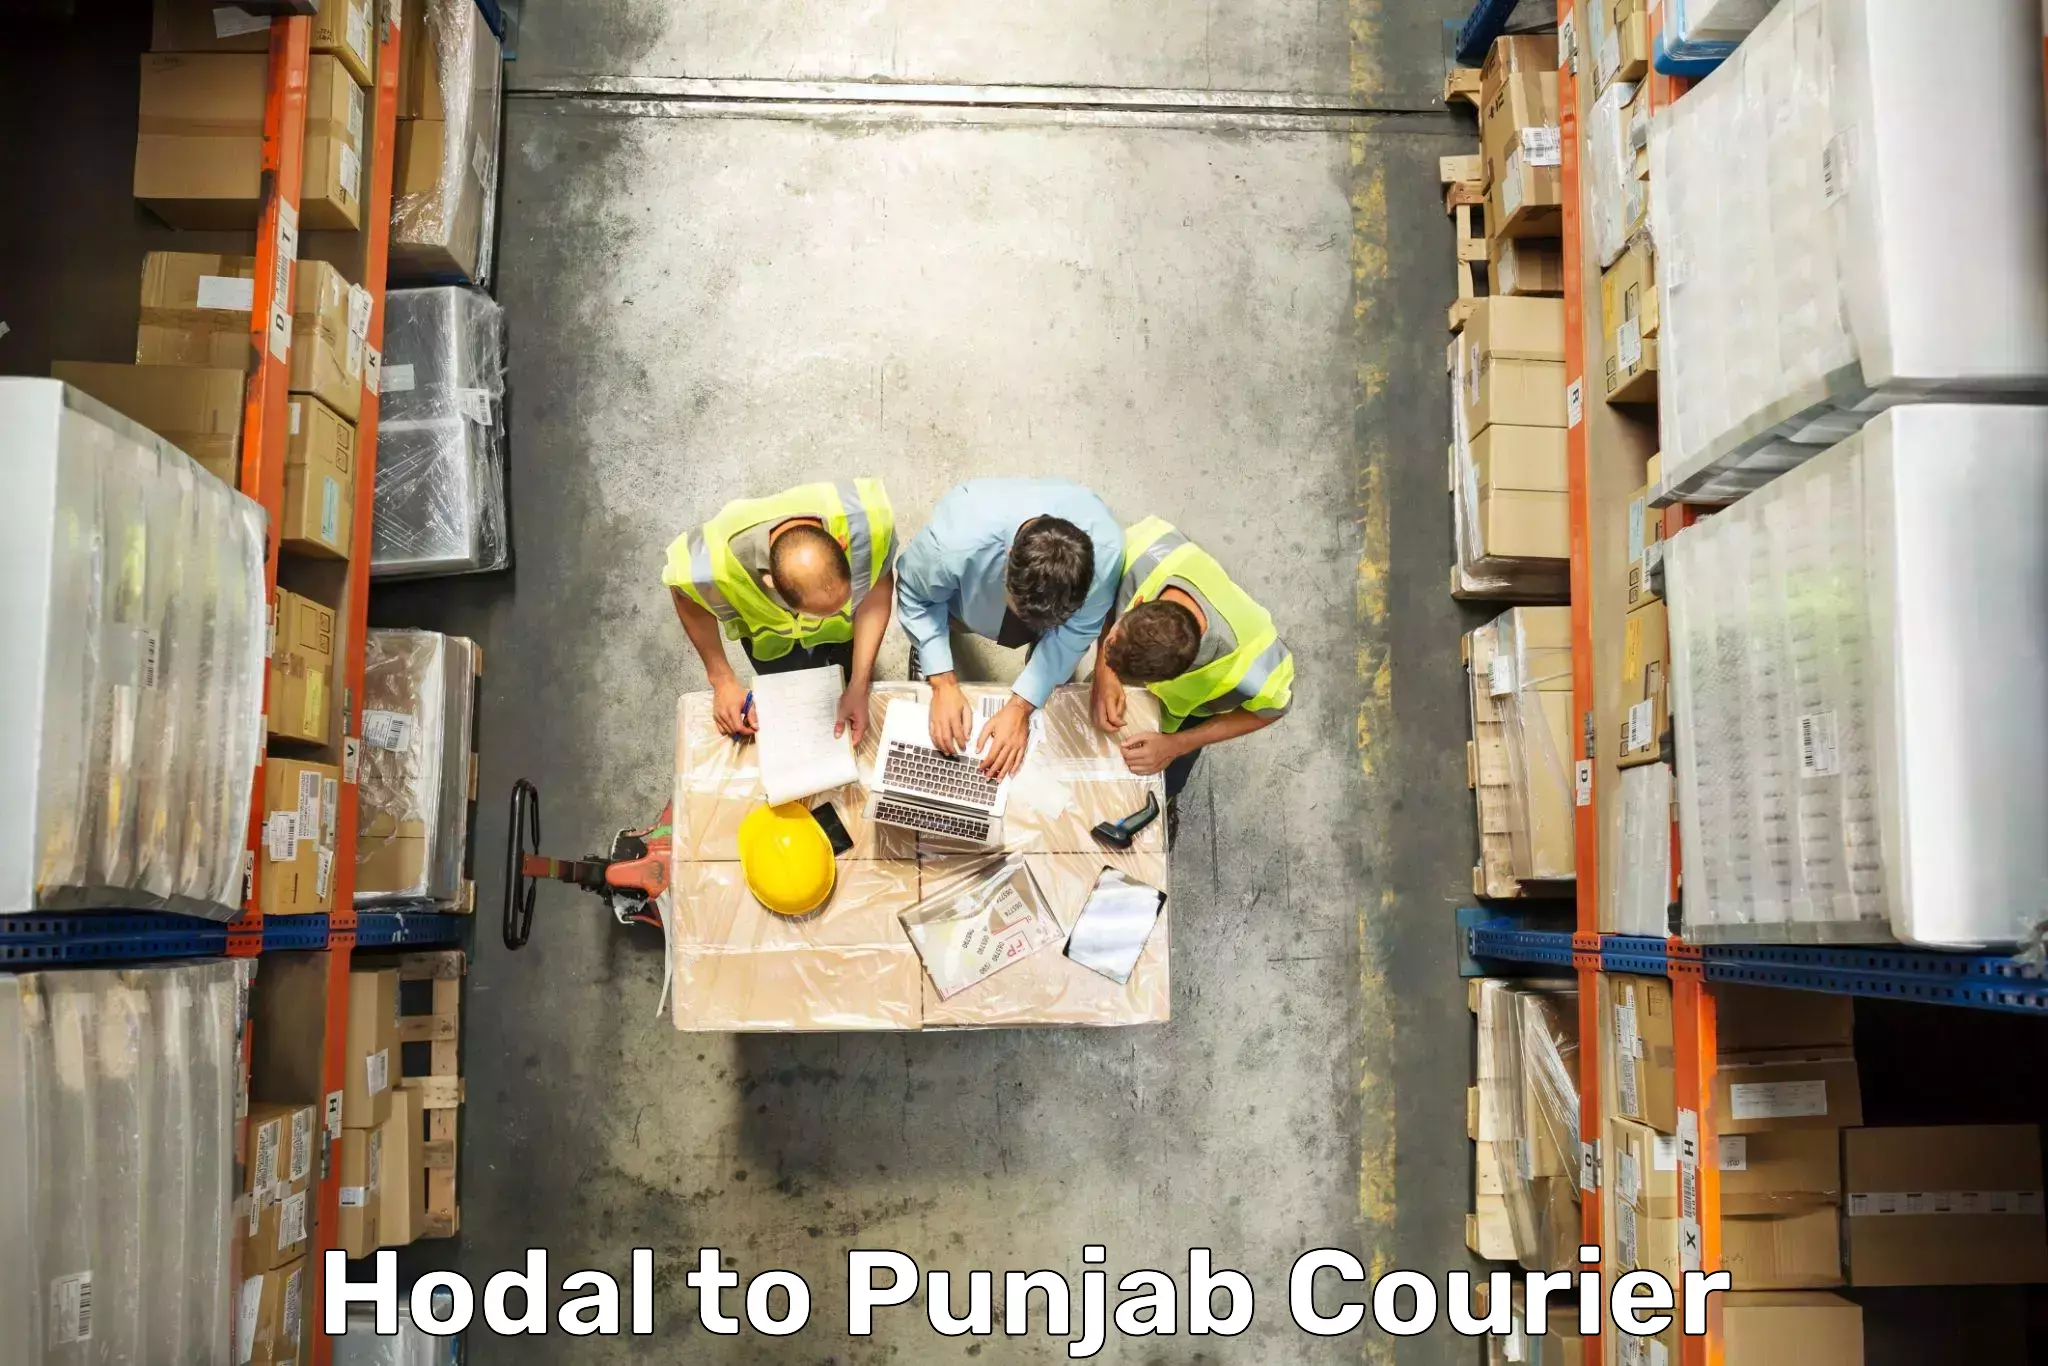 Luggage shipment specialists Hodal to Punjab